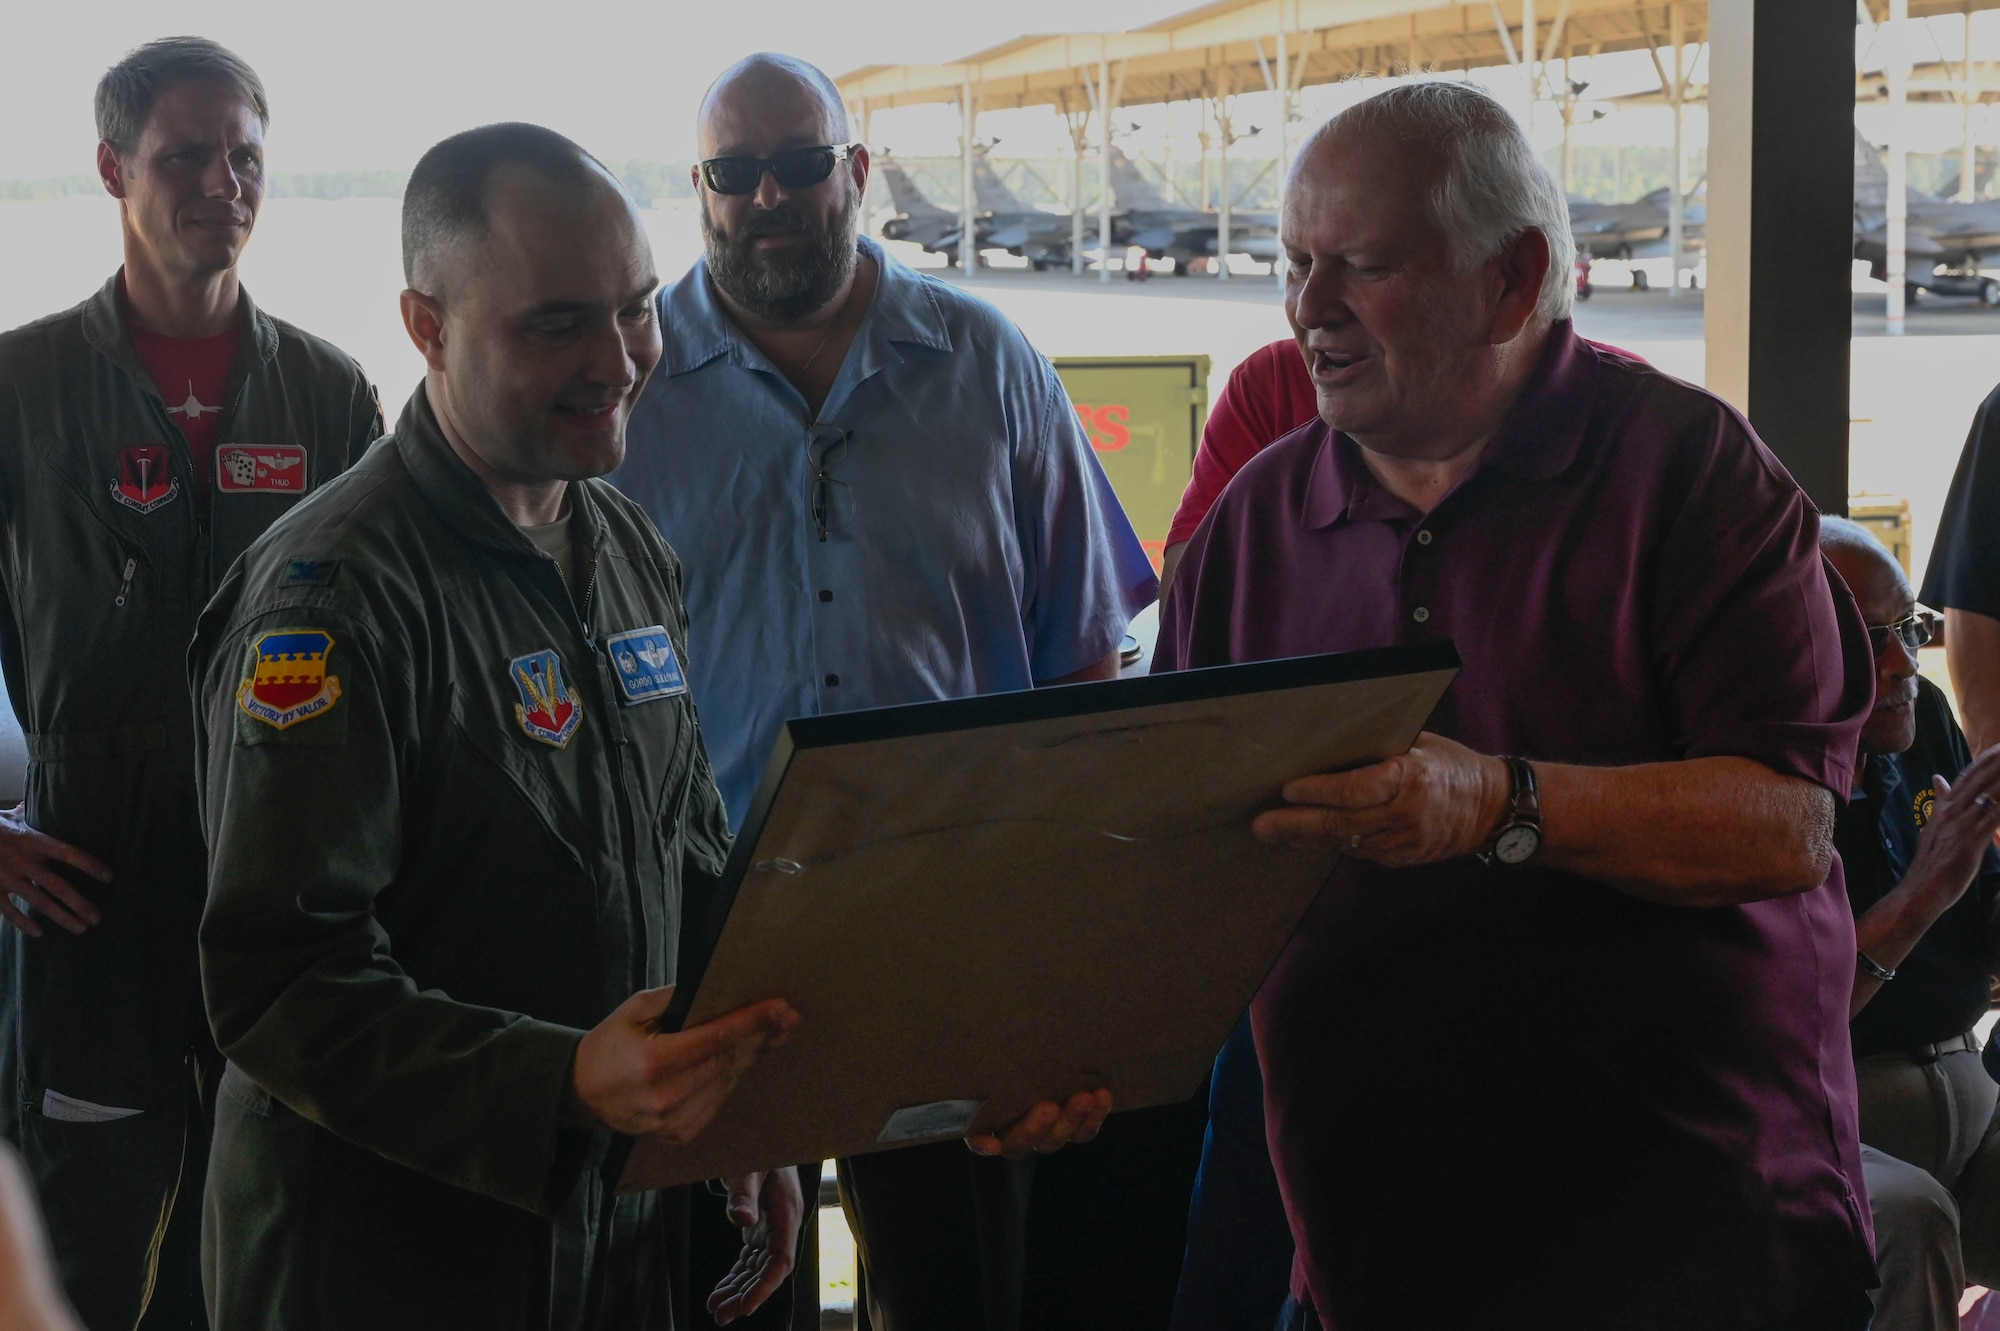 A photo of a U.S. Air Force leader receiving a gift from a veteran